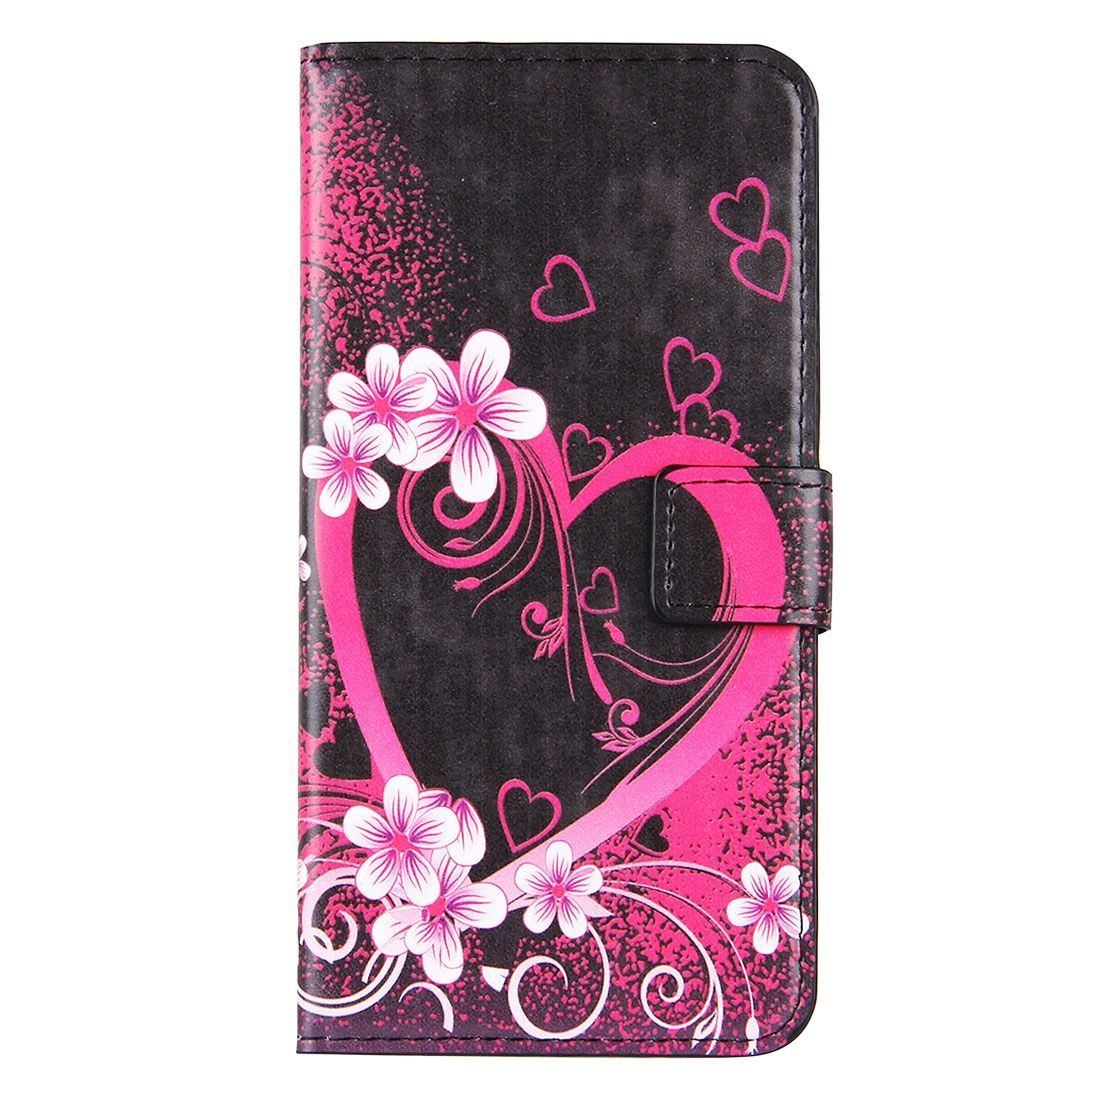 For iPhone 8 PLUS,7 PLUS Wallet Case,Blossoming Heart Protective Leather Cover